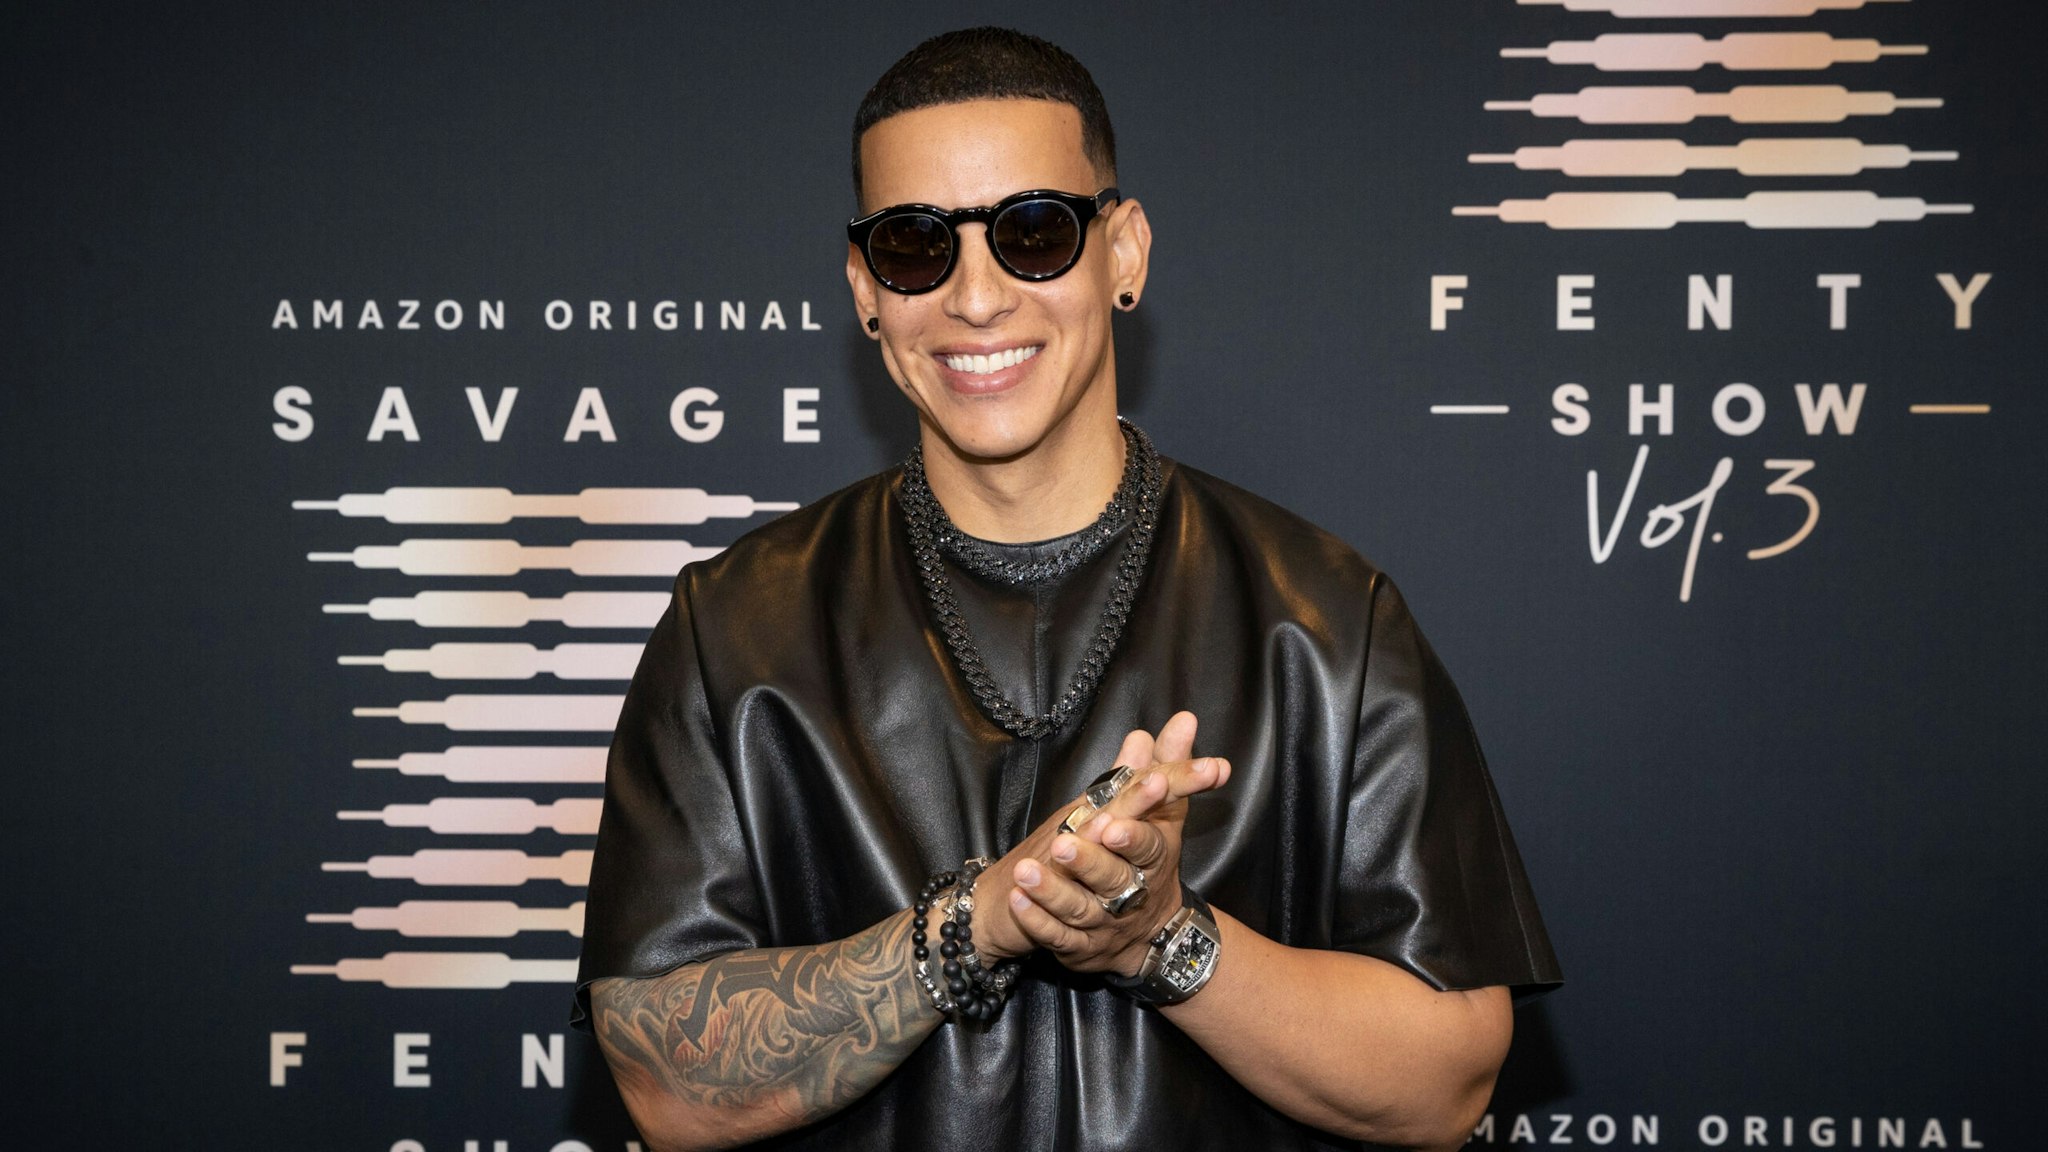 LOS ANGELES, CALIFORNIA - SEPTEMBER 22: In this image released on September 22, Daddy Yankee attends Rihanna's Savage X Fenty Show Vol. 3 presented by Amazon Prime Video at The Westin Bonaventure Hotel &amp; Suites in Los Angeles, California; and broadcast on September 24, 2021.